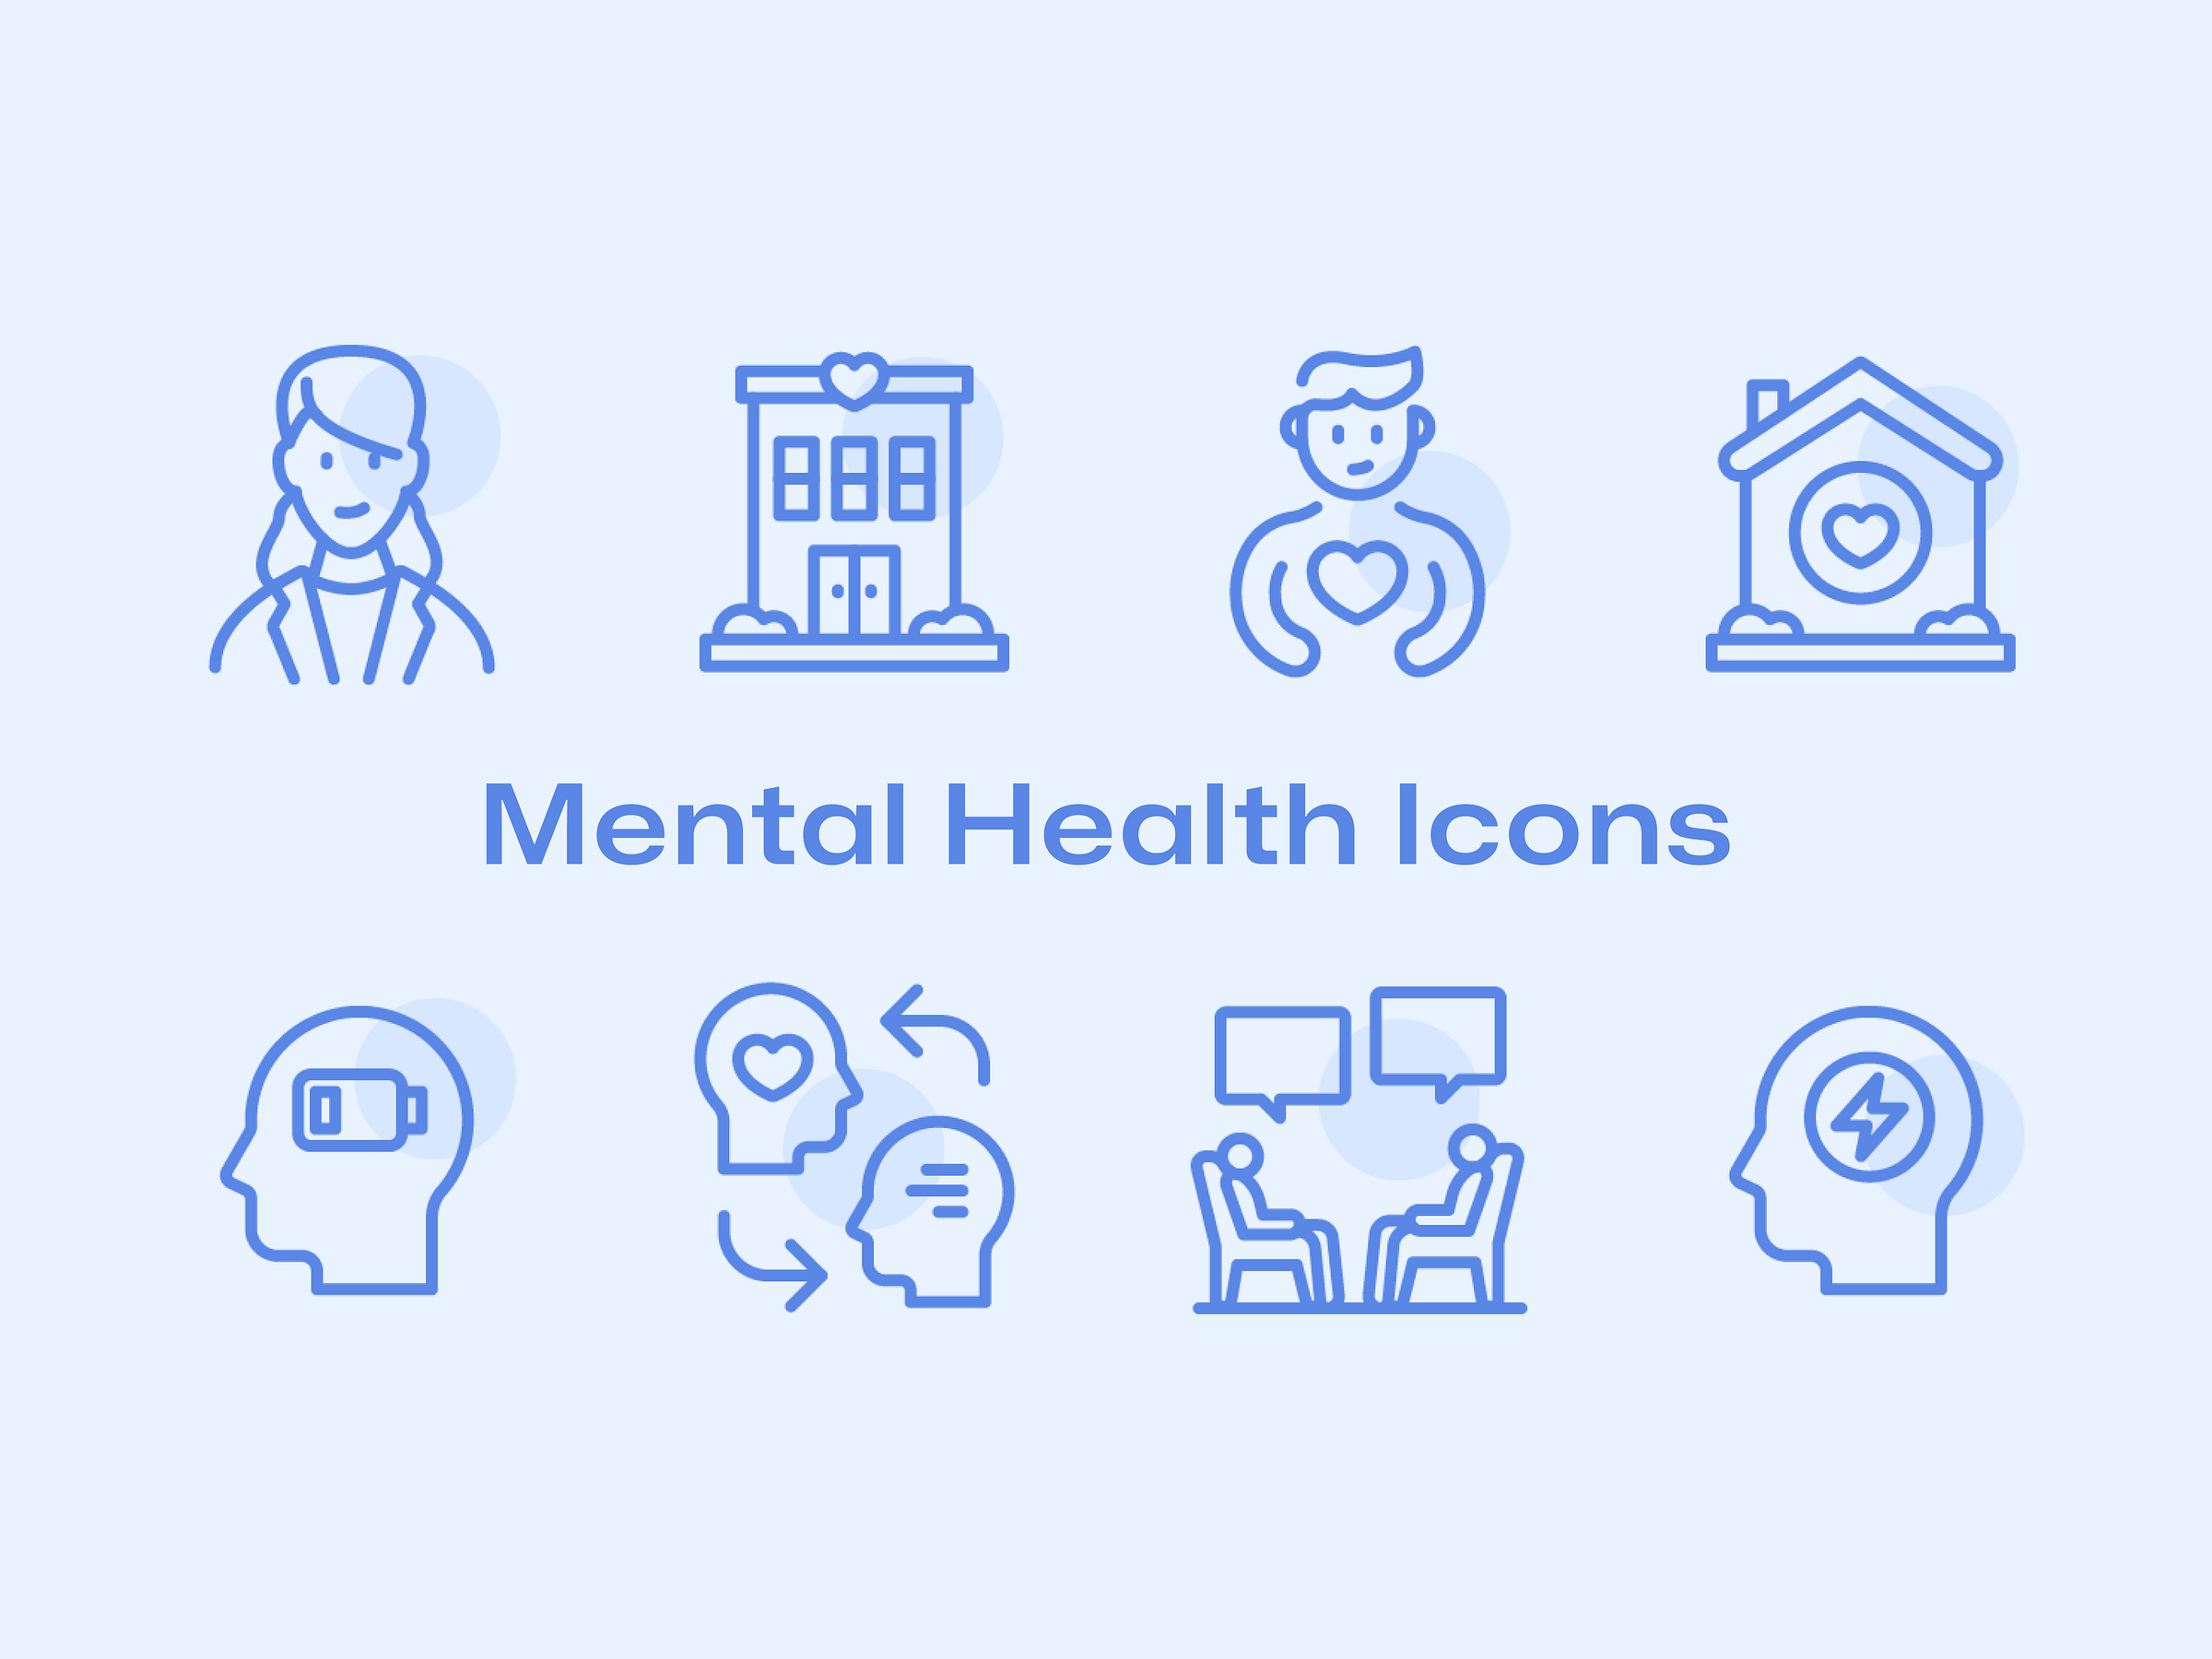 Mental Health Icons by Rod Blackney on Dribbble